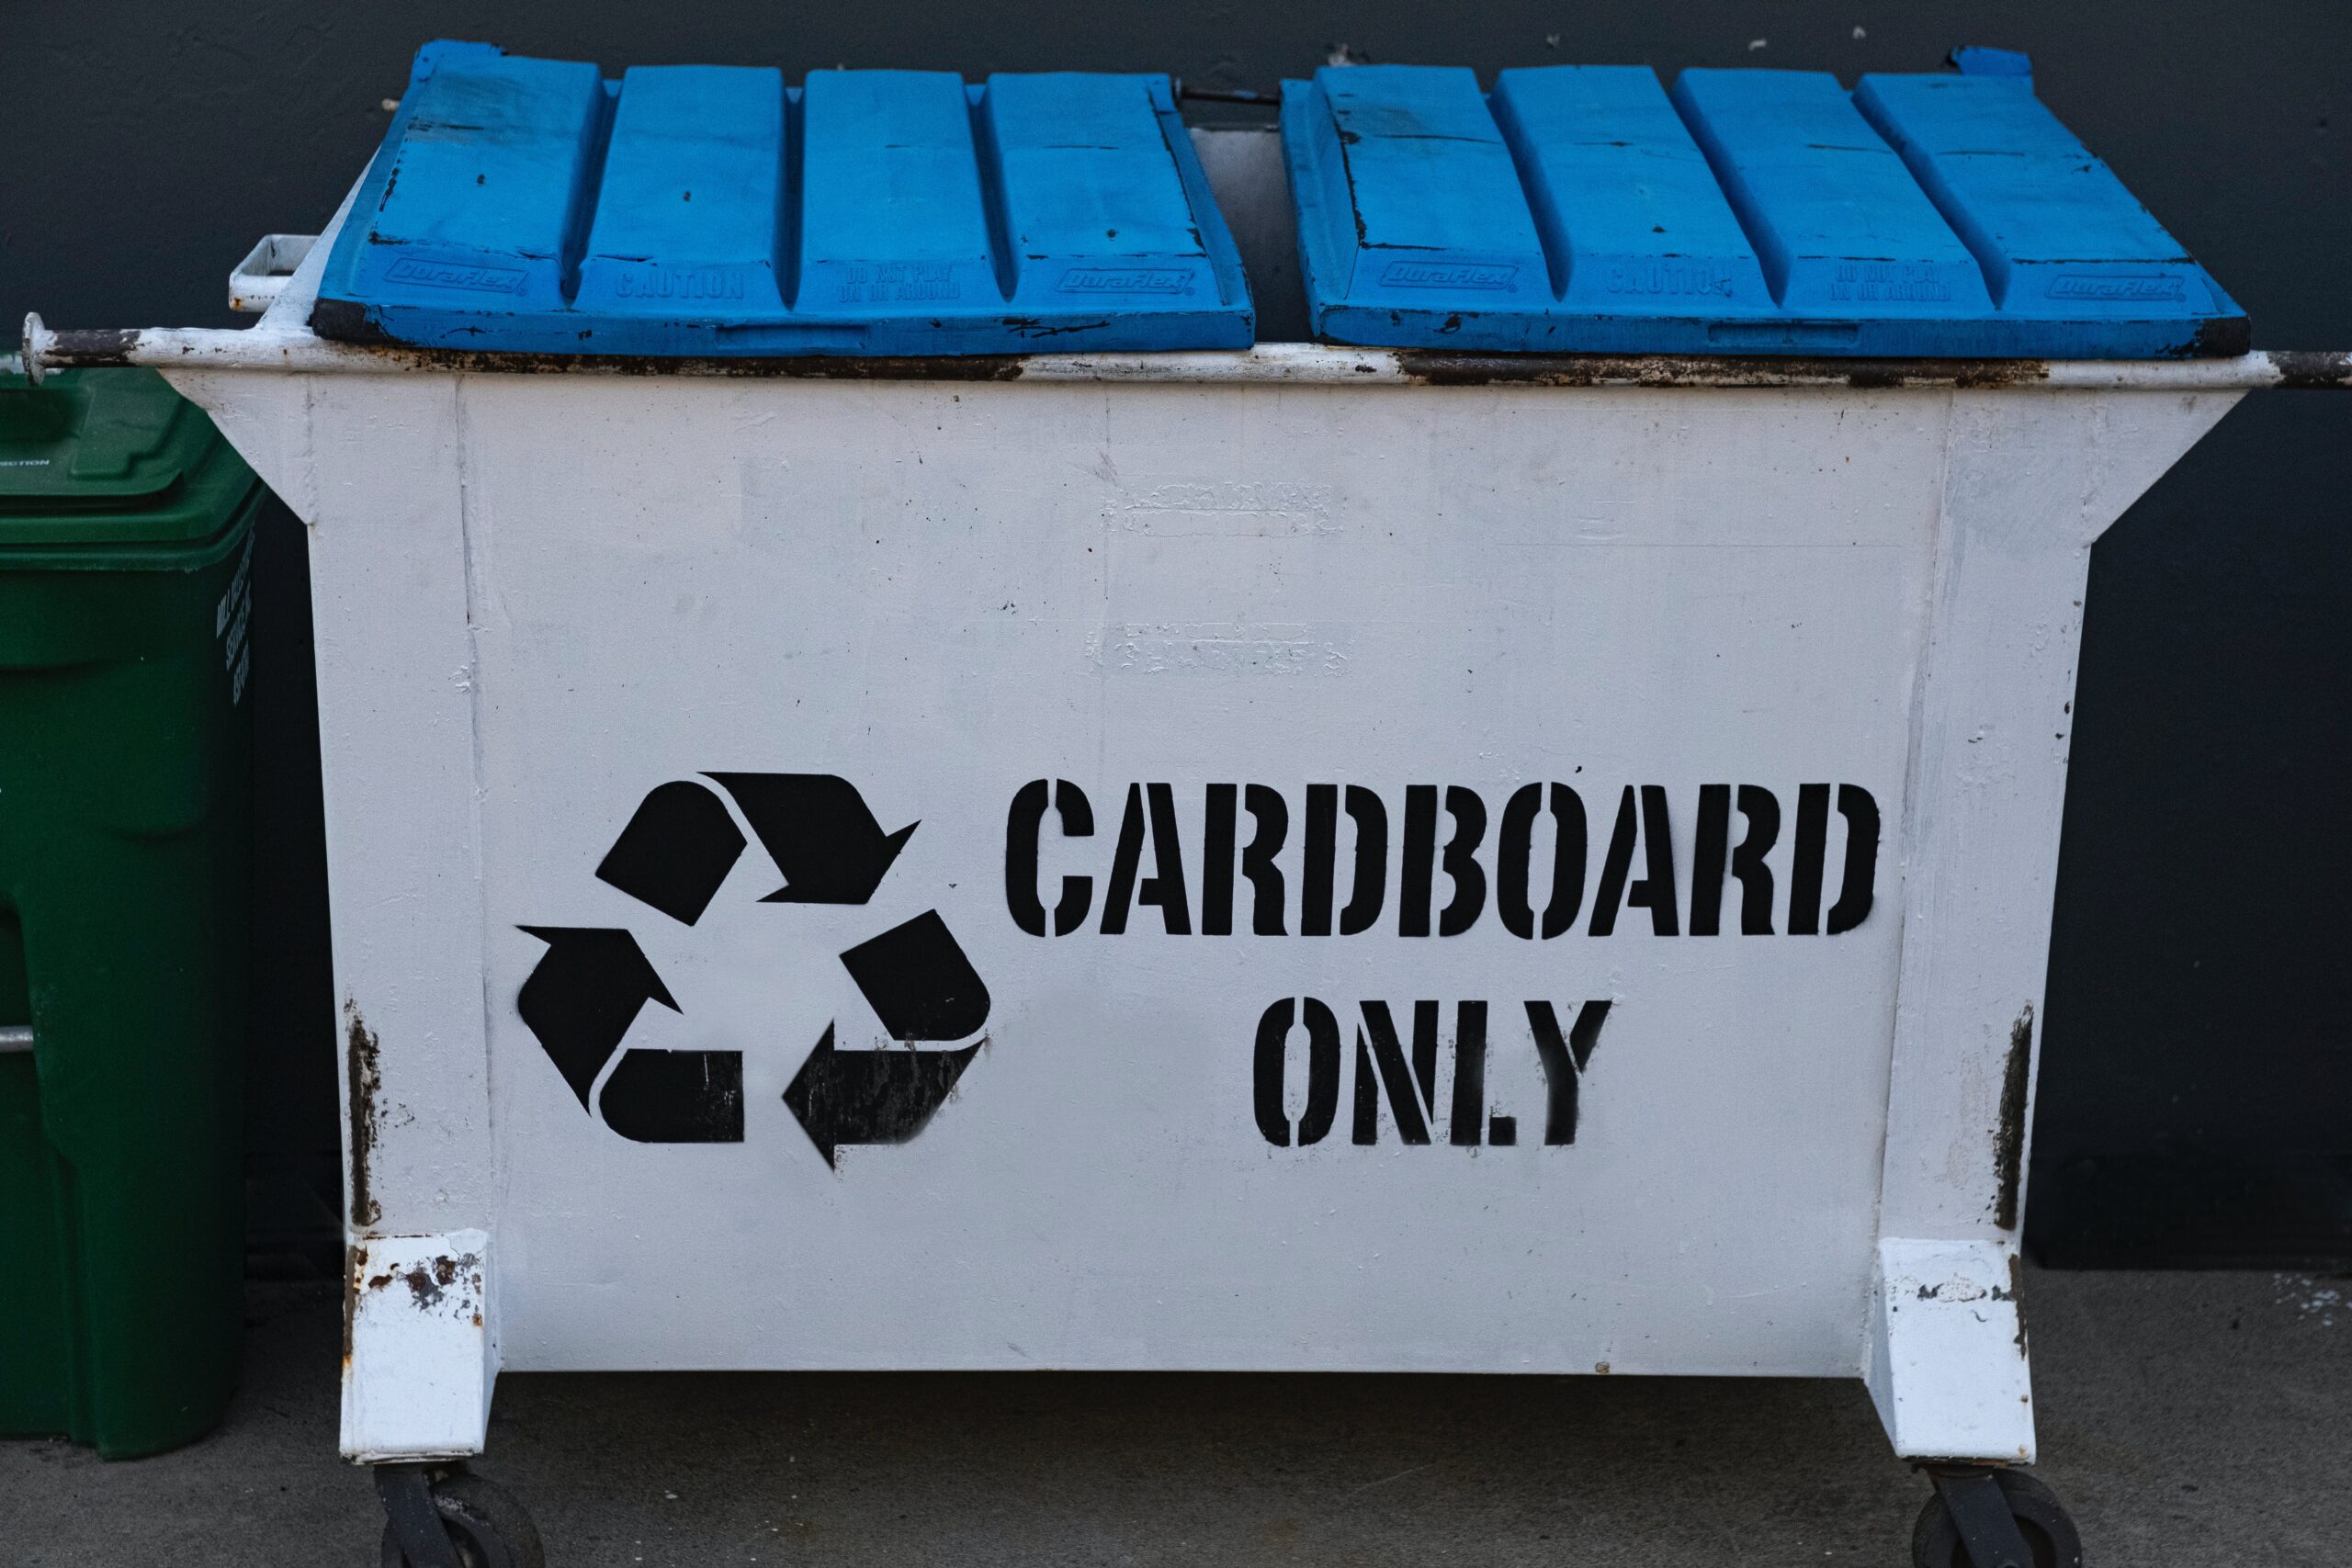 Avoiding Overpriced Dumpster Rentals Red Flags to Watch Out For